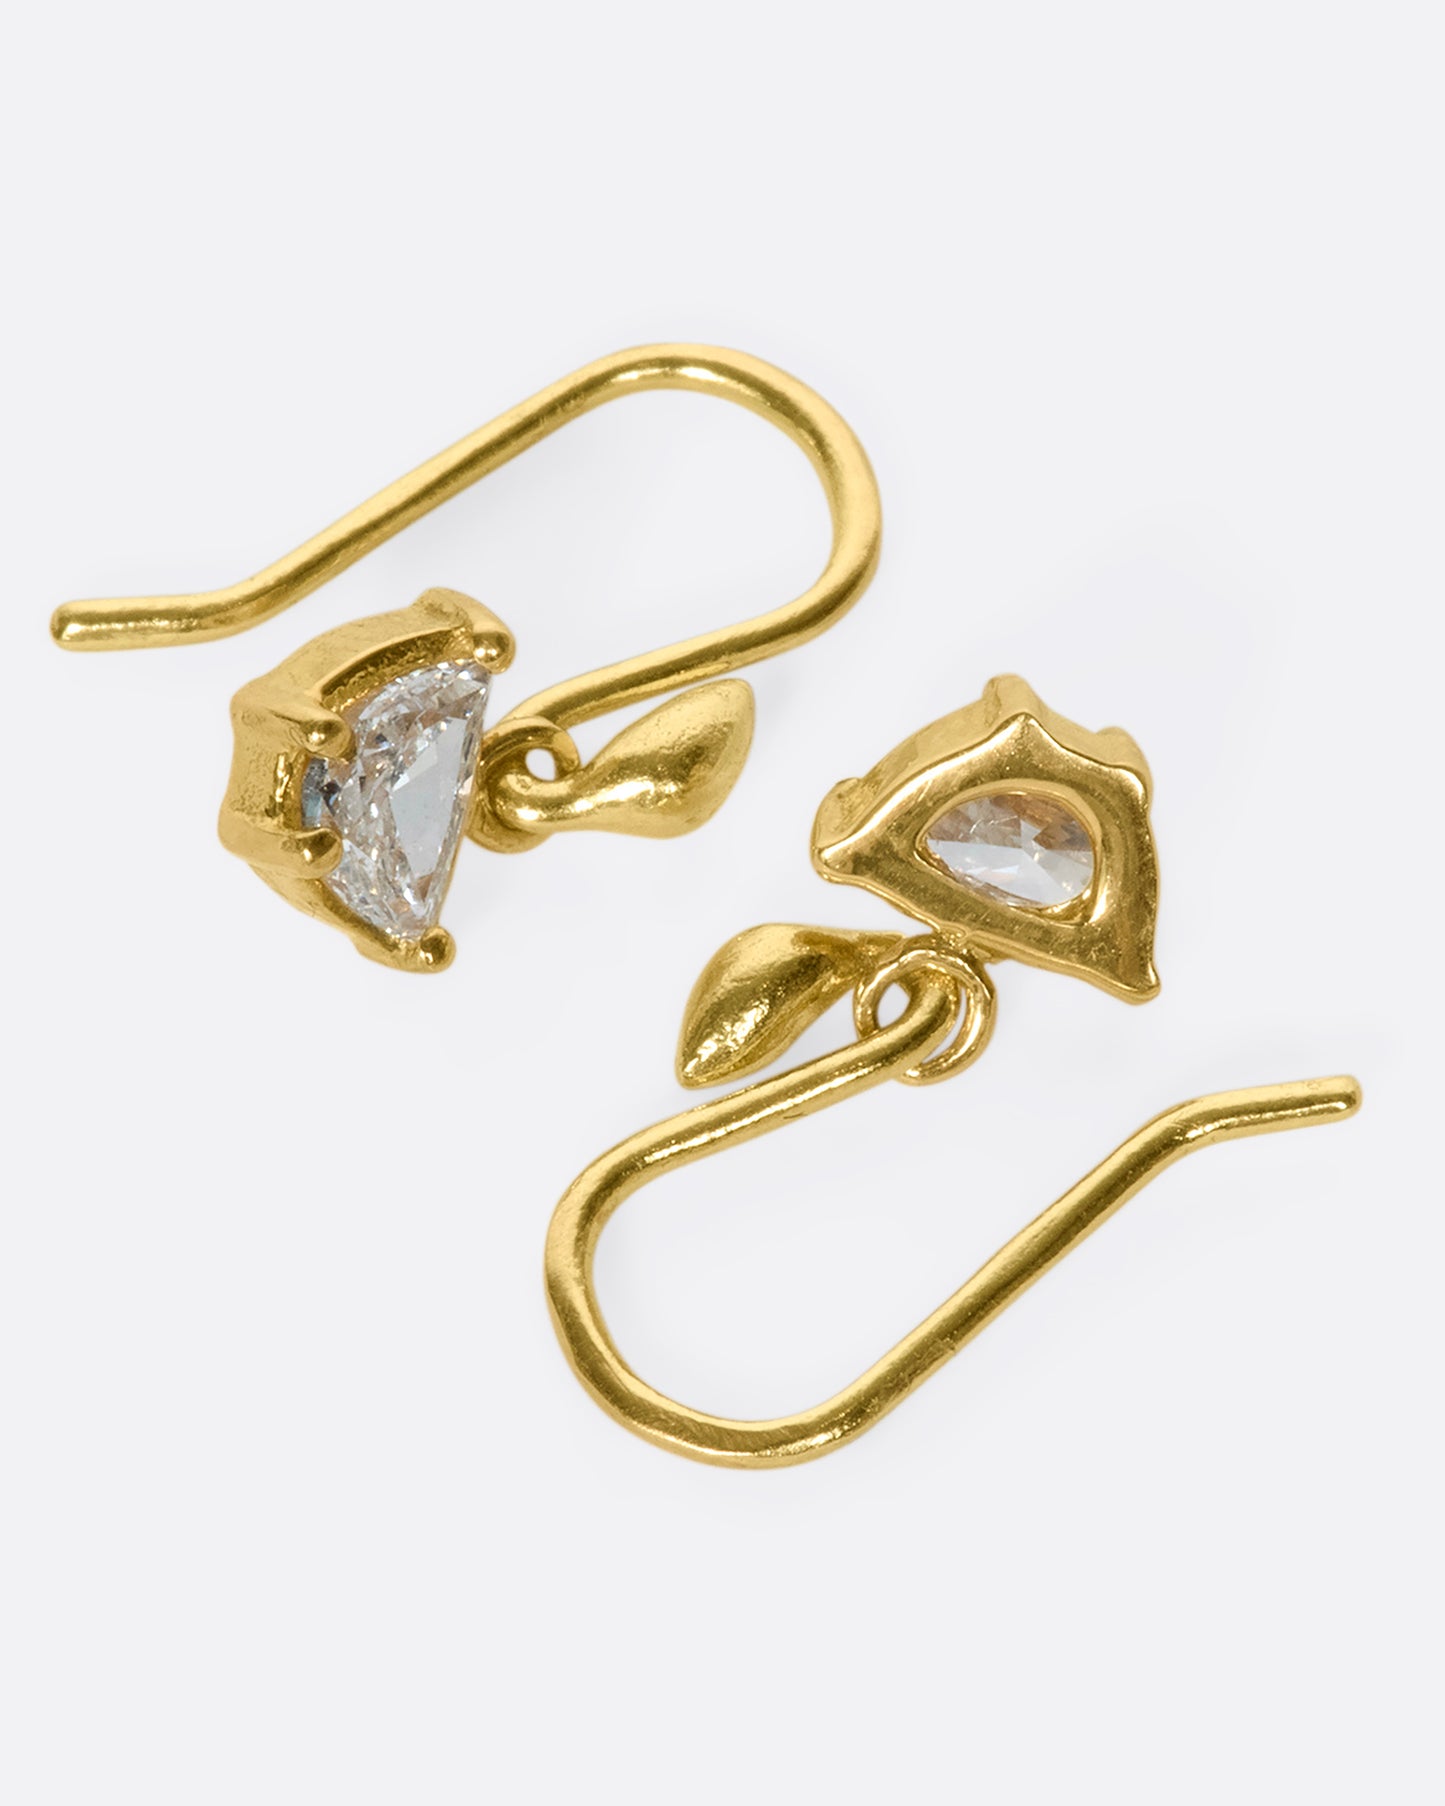 A unique pair of trapezoid-shaped diamond drops set in 18k gold